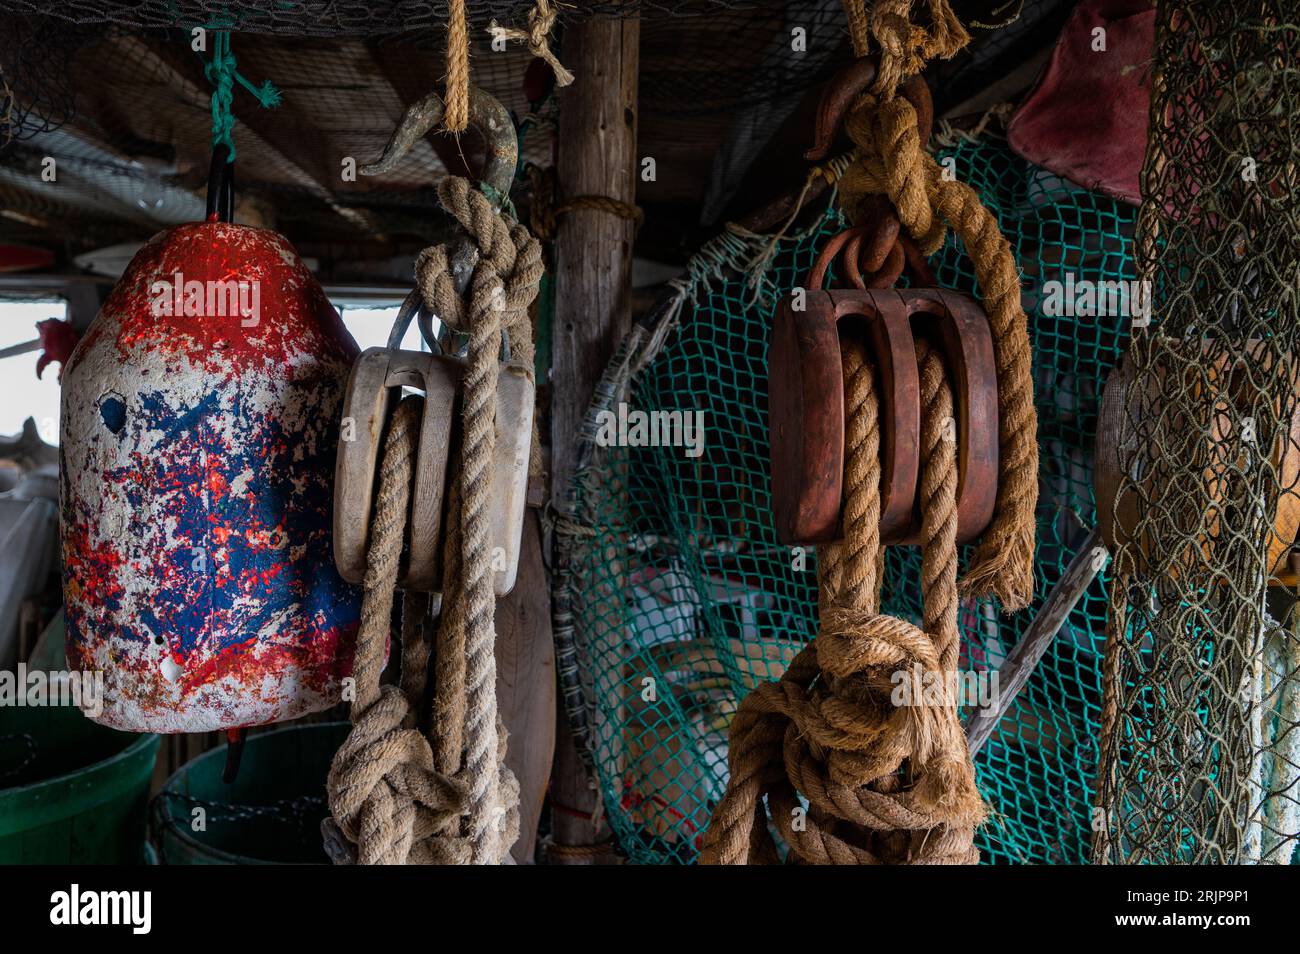 couple fishing ropes are tied and various objects are hanging from the ceiling Stock Photo